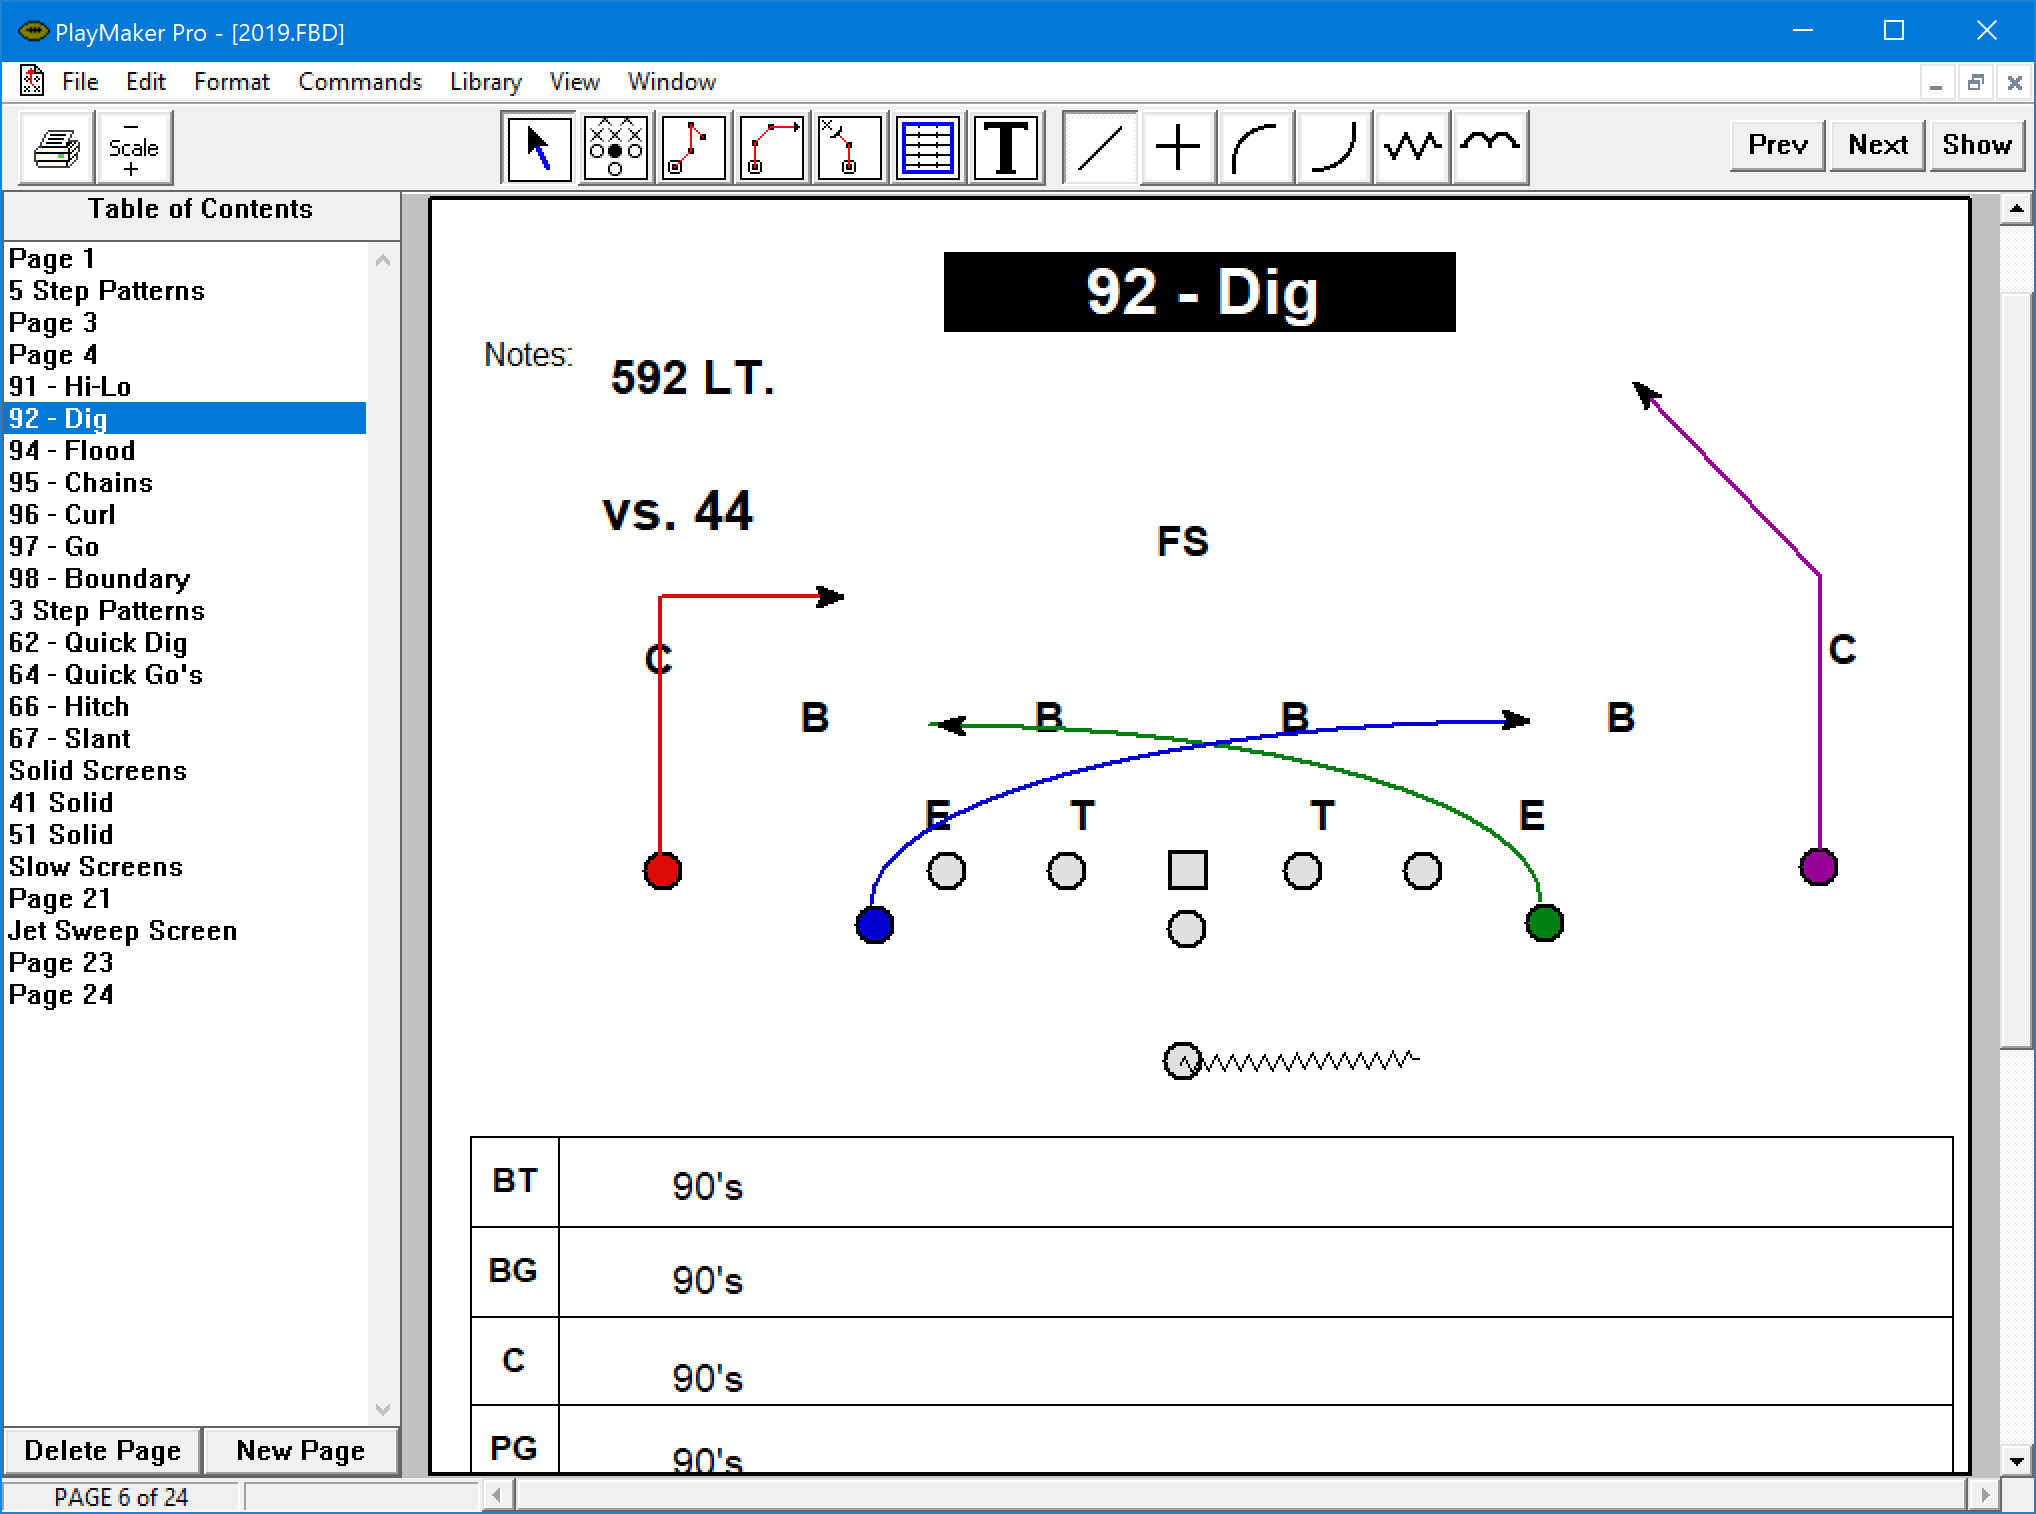 PlayMaker Pro 4.8 for Windows